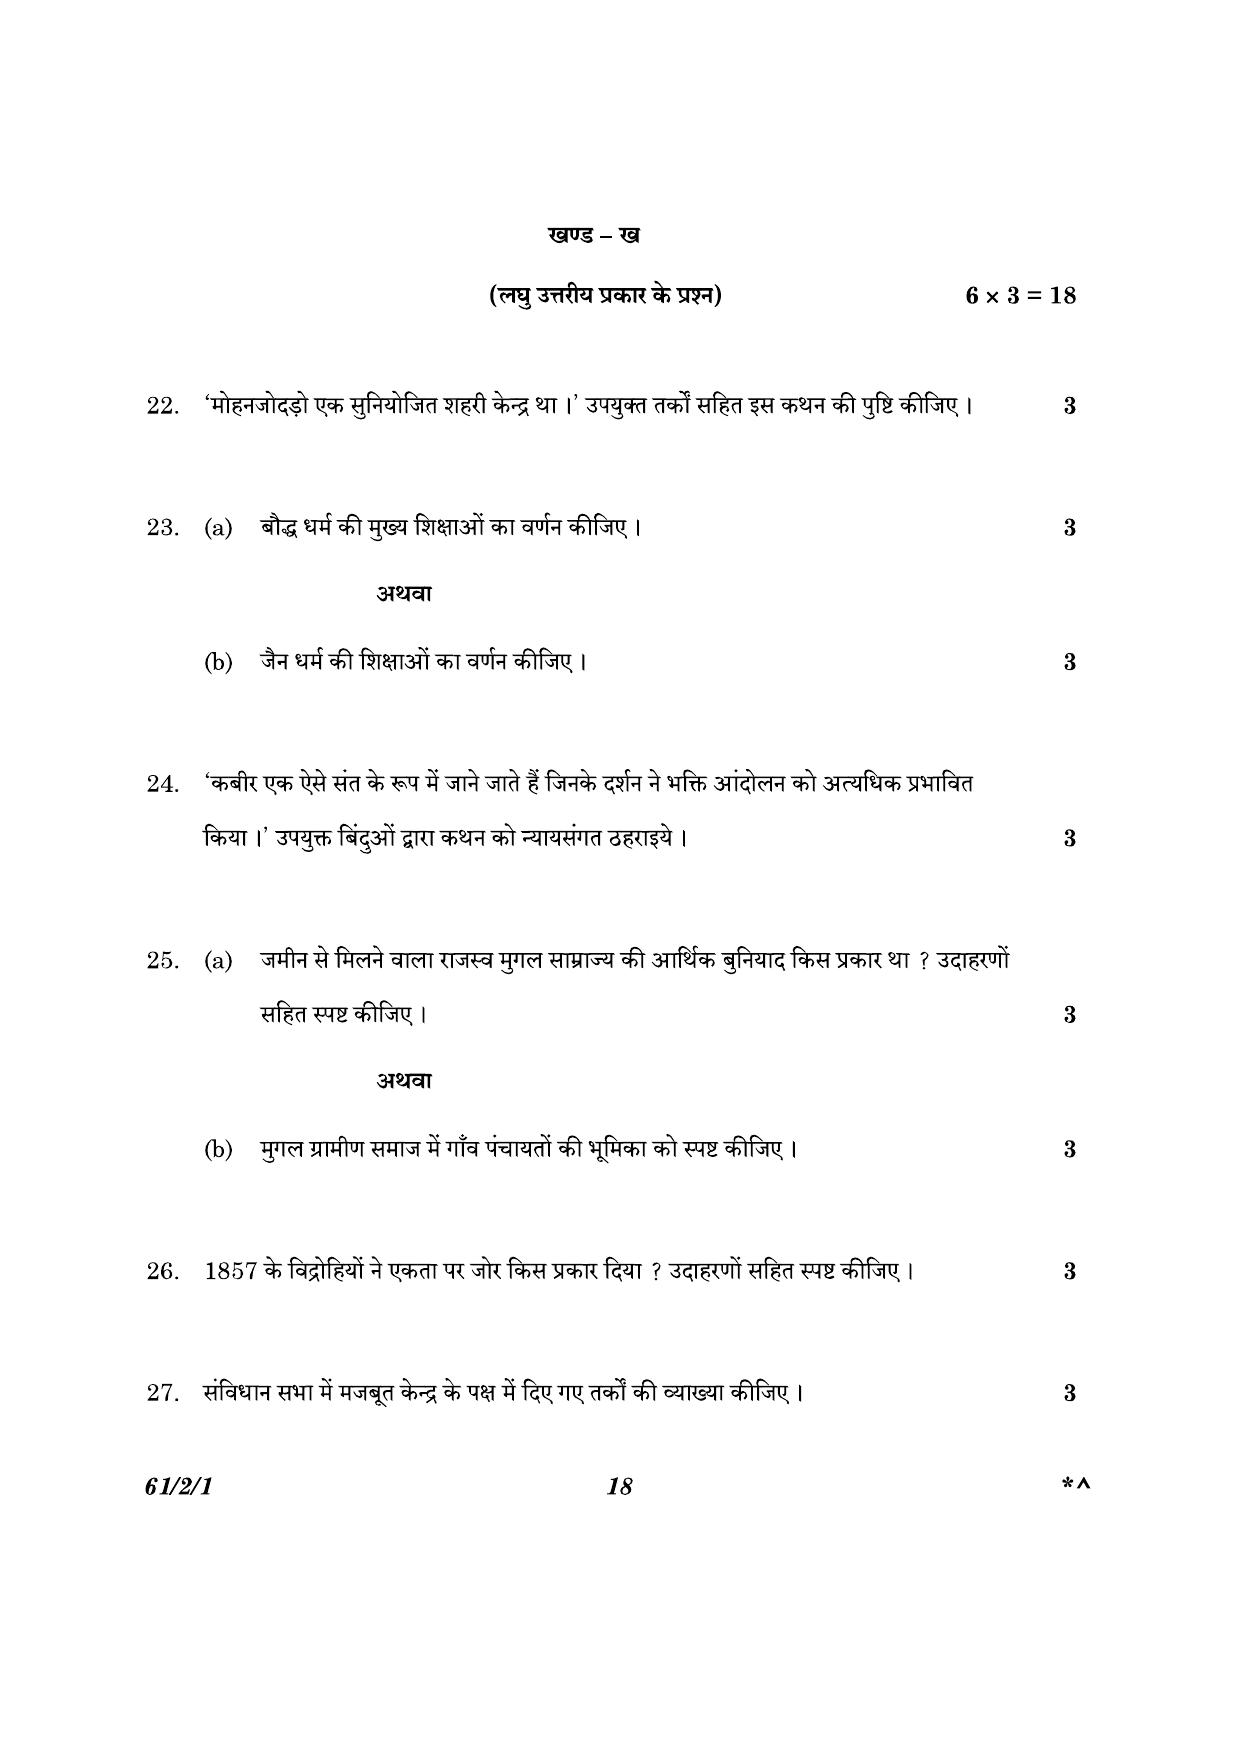 CBSE Class 12 61-2-1 History 2023 Question Paper - Page 18